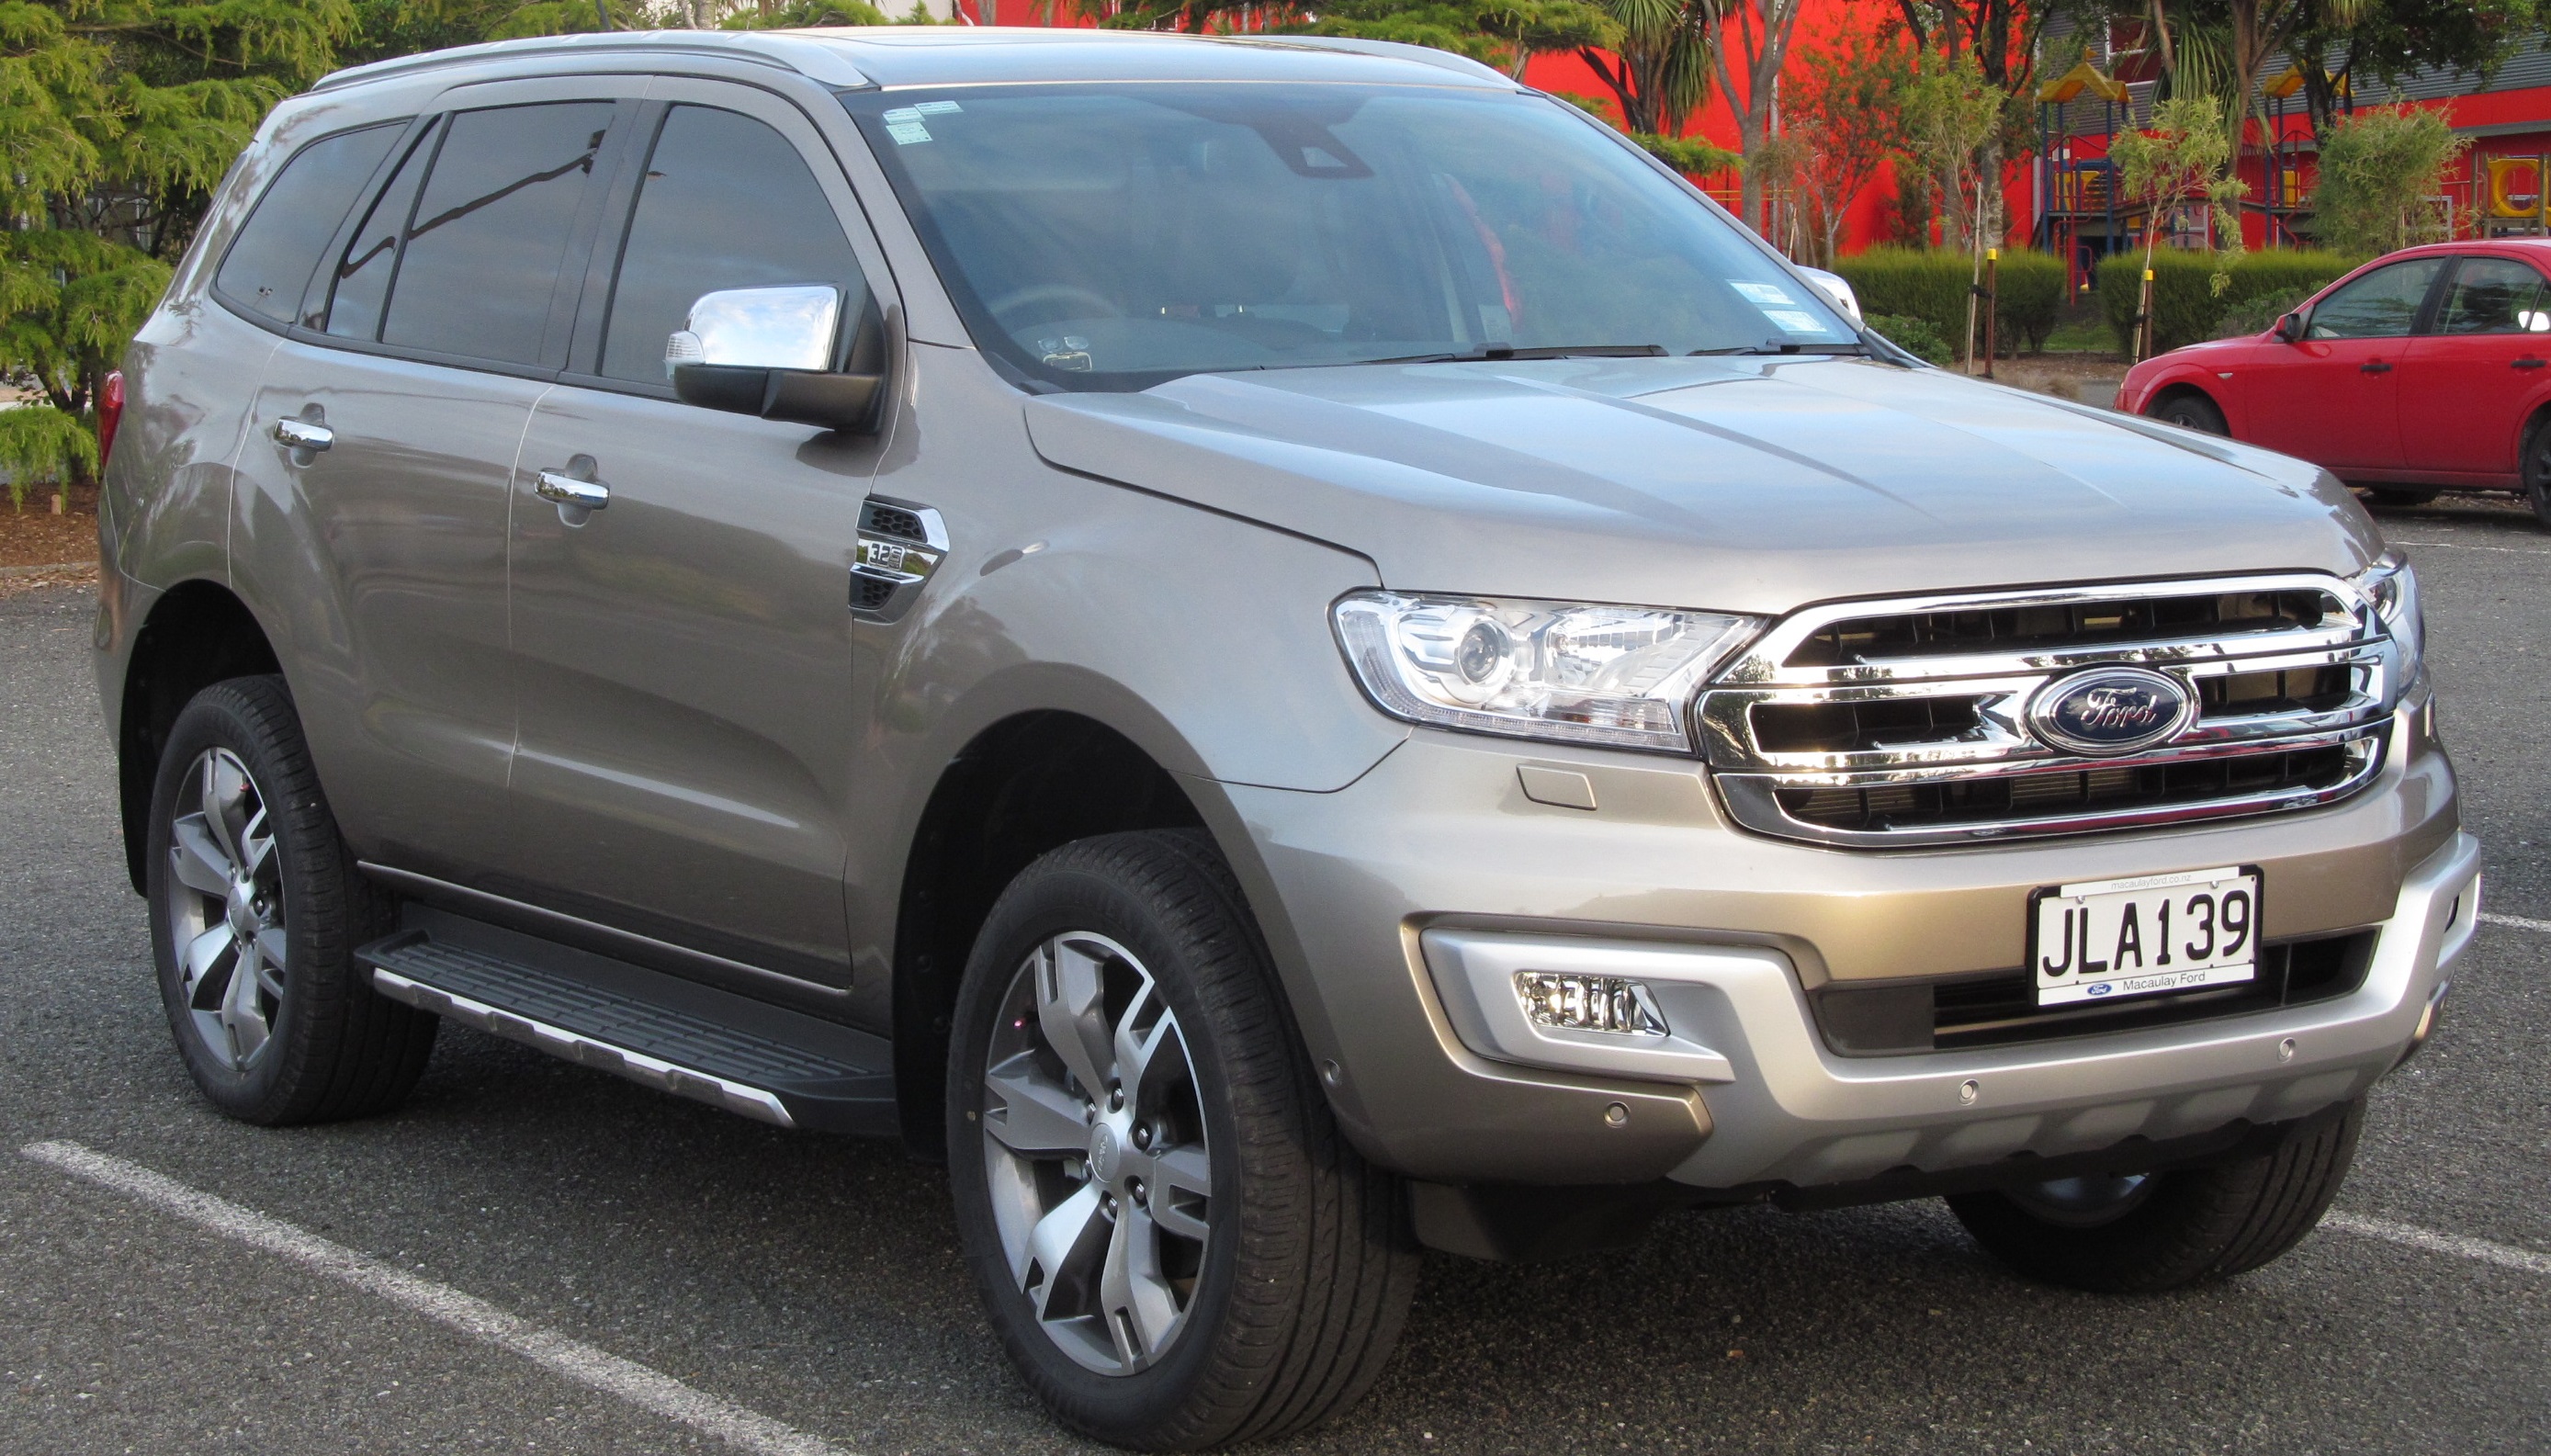 Ford Everest Backgrounds, Compatible - PC, Mobile, Gadgets| 2777x1585 px